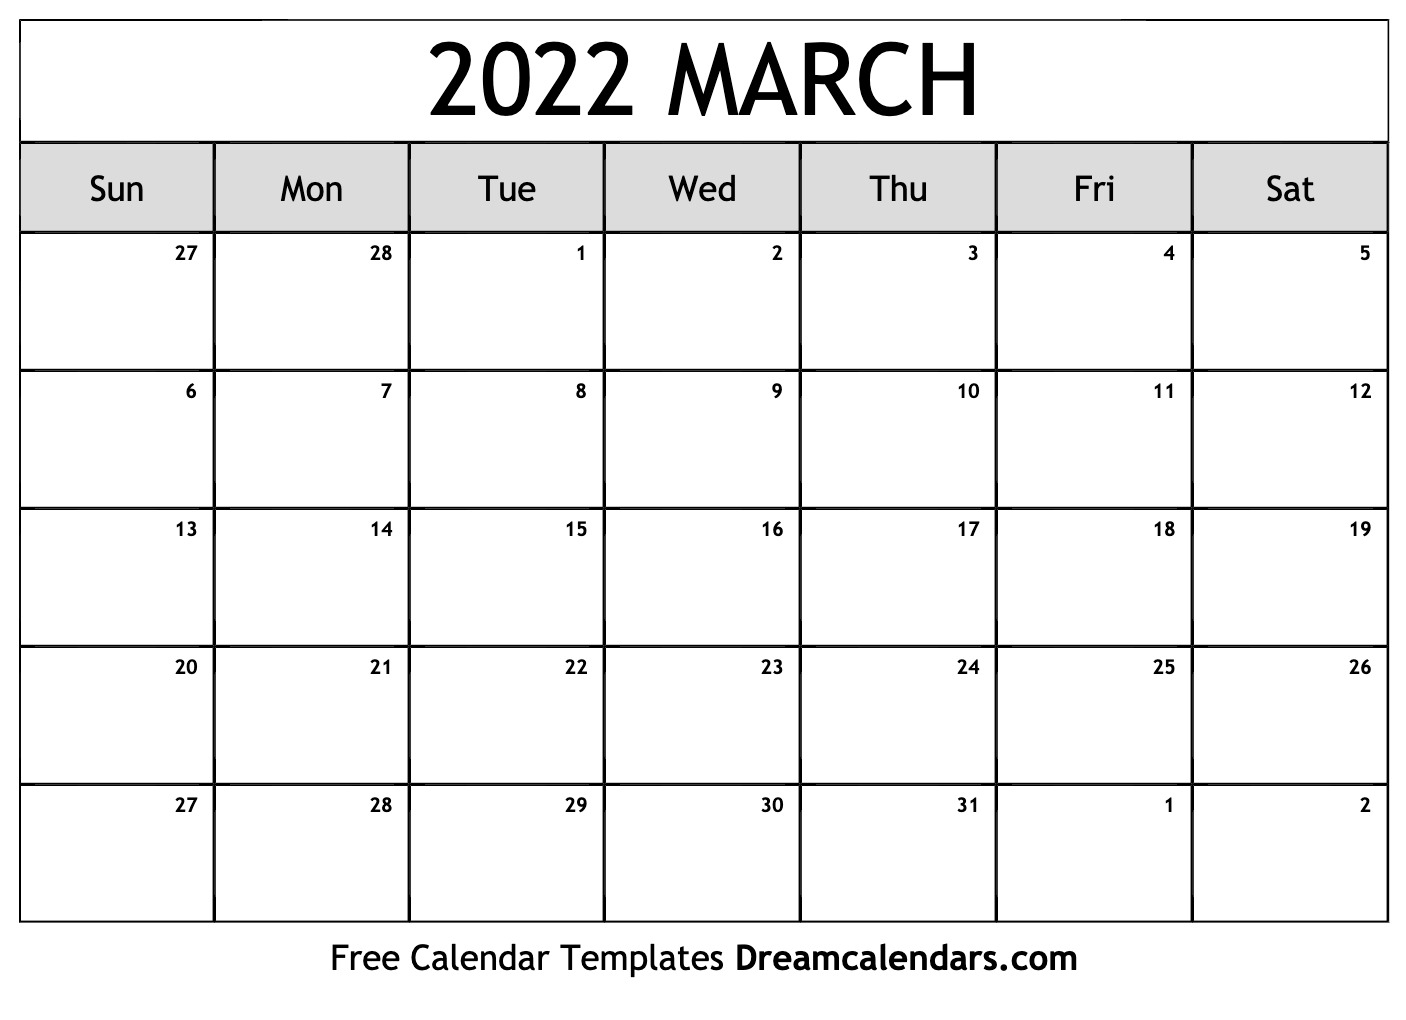 Get Calendar For February And March 2022